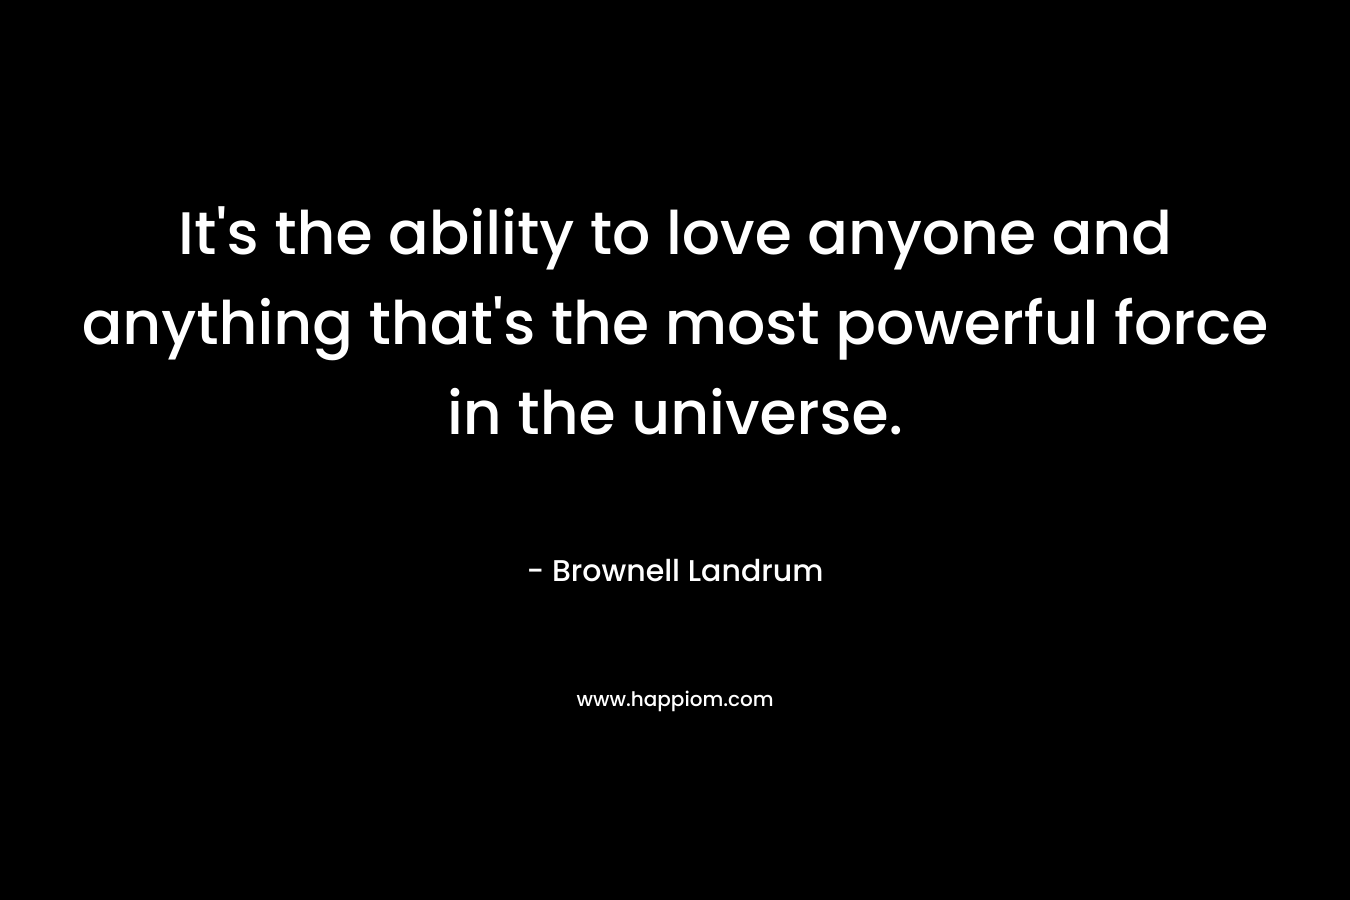 It's the ability to love anyone and anything that's the most powerful force in the universe.